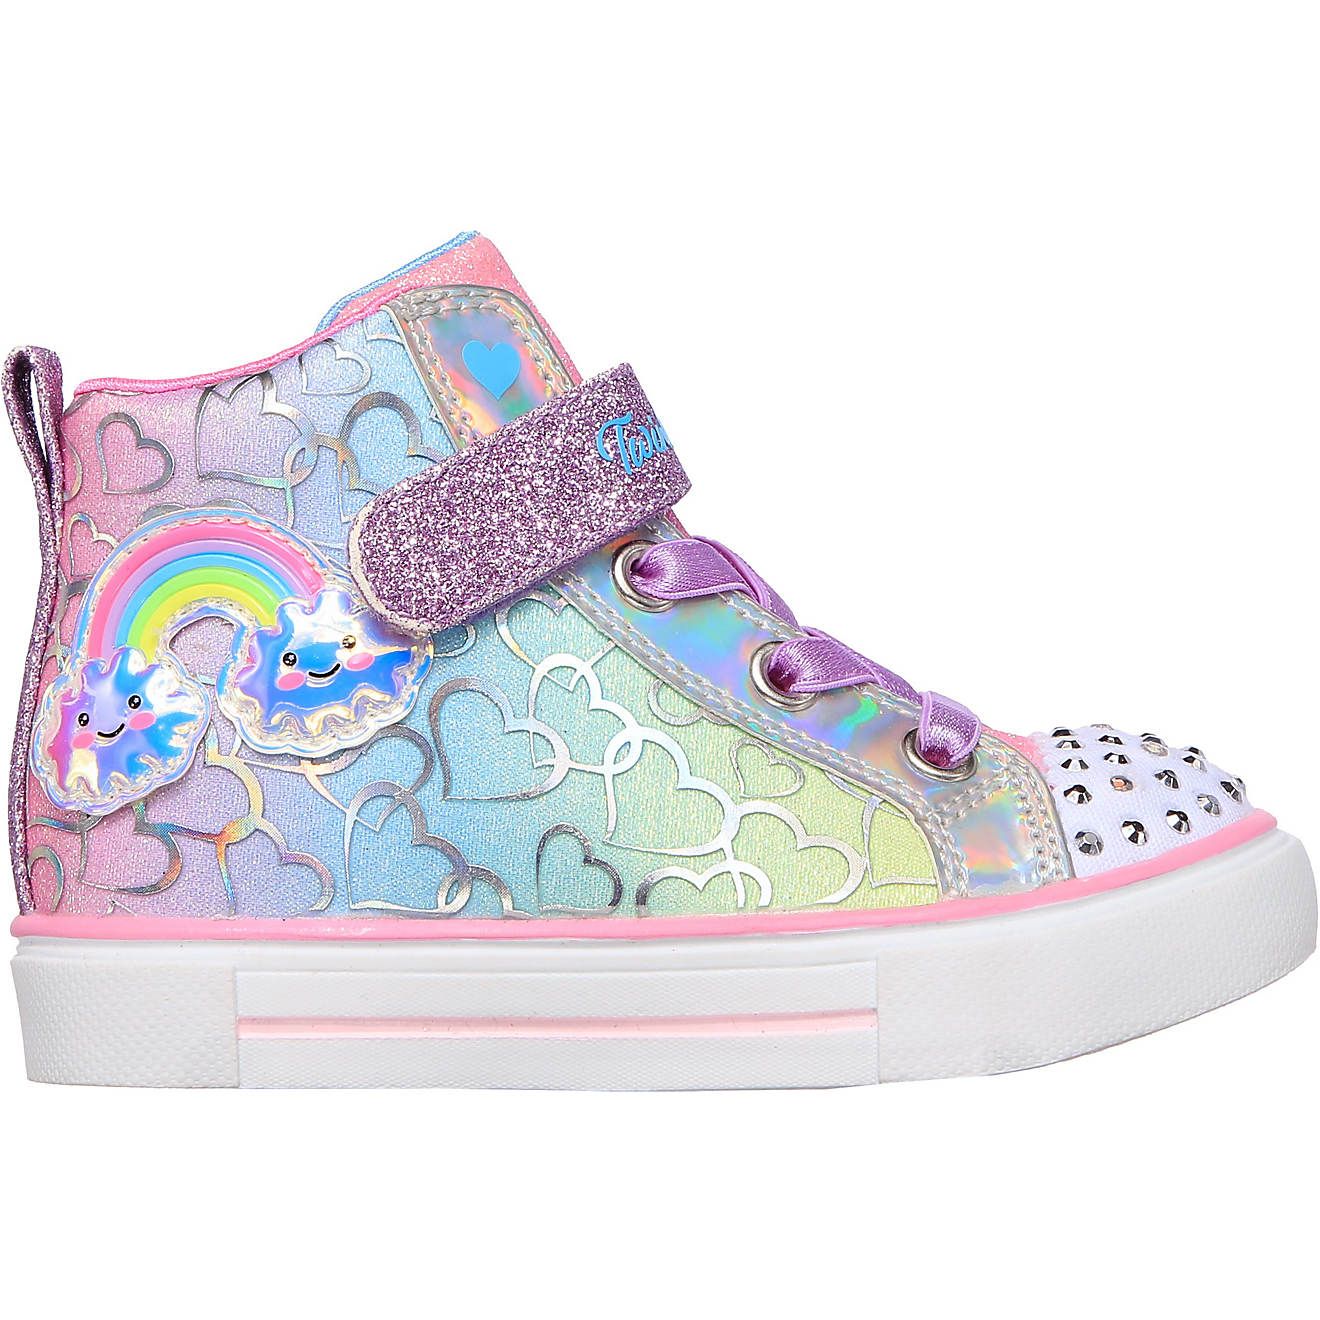 SKECHERS Toddler Girls’ TT Twinkle Sparks Magic-Tastic Shoes | Academy | Academy Sports + Outdoors